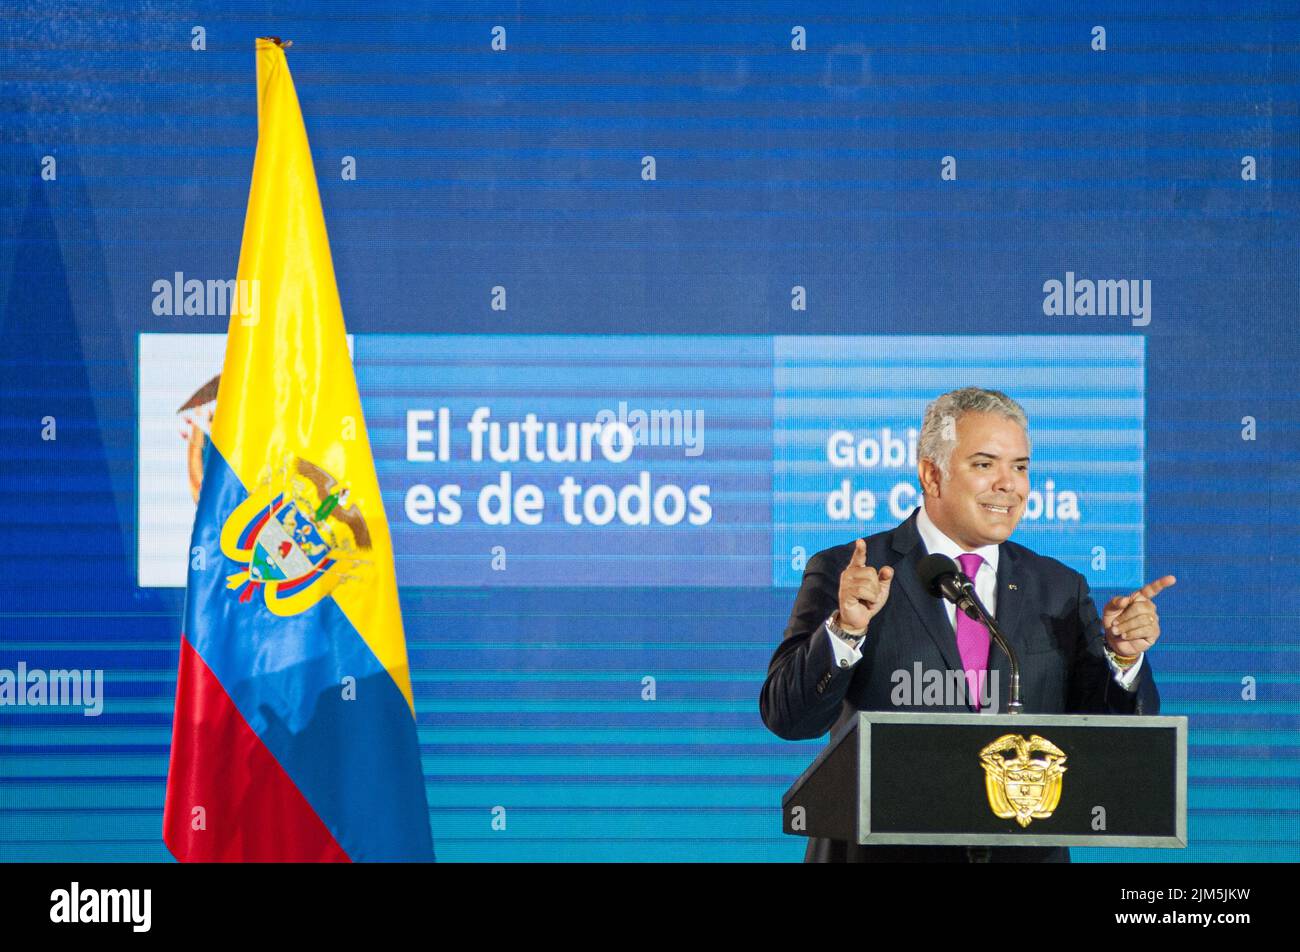 Colombian president Ivan Duque Marquez gives a speech during a finance cooperation between Colombian Government and the government of Bogota for the d Stock Photo